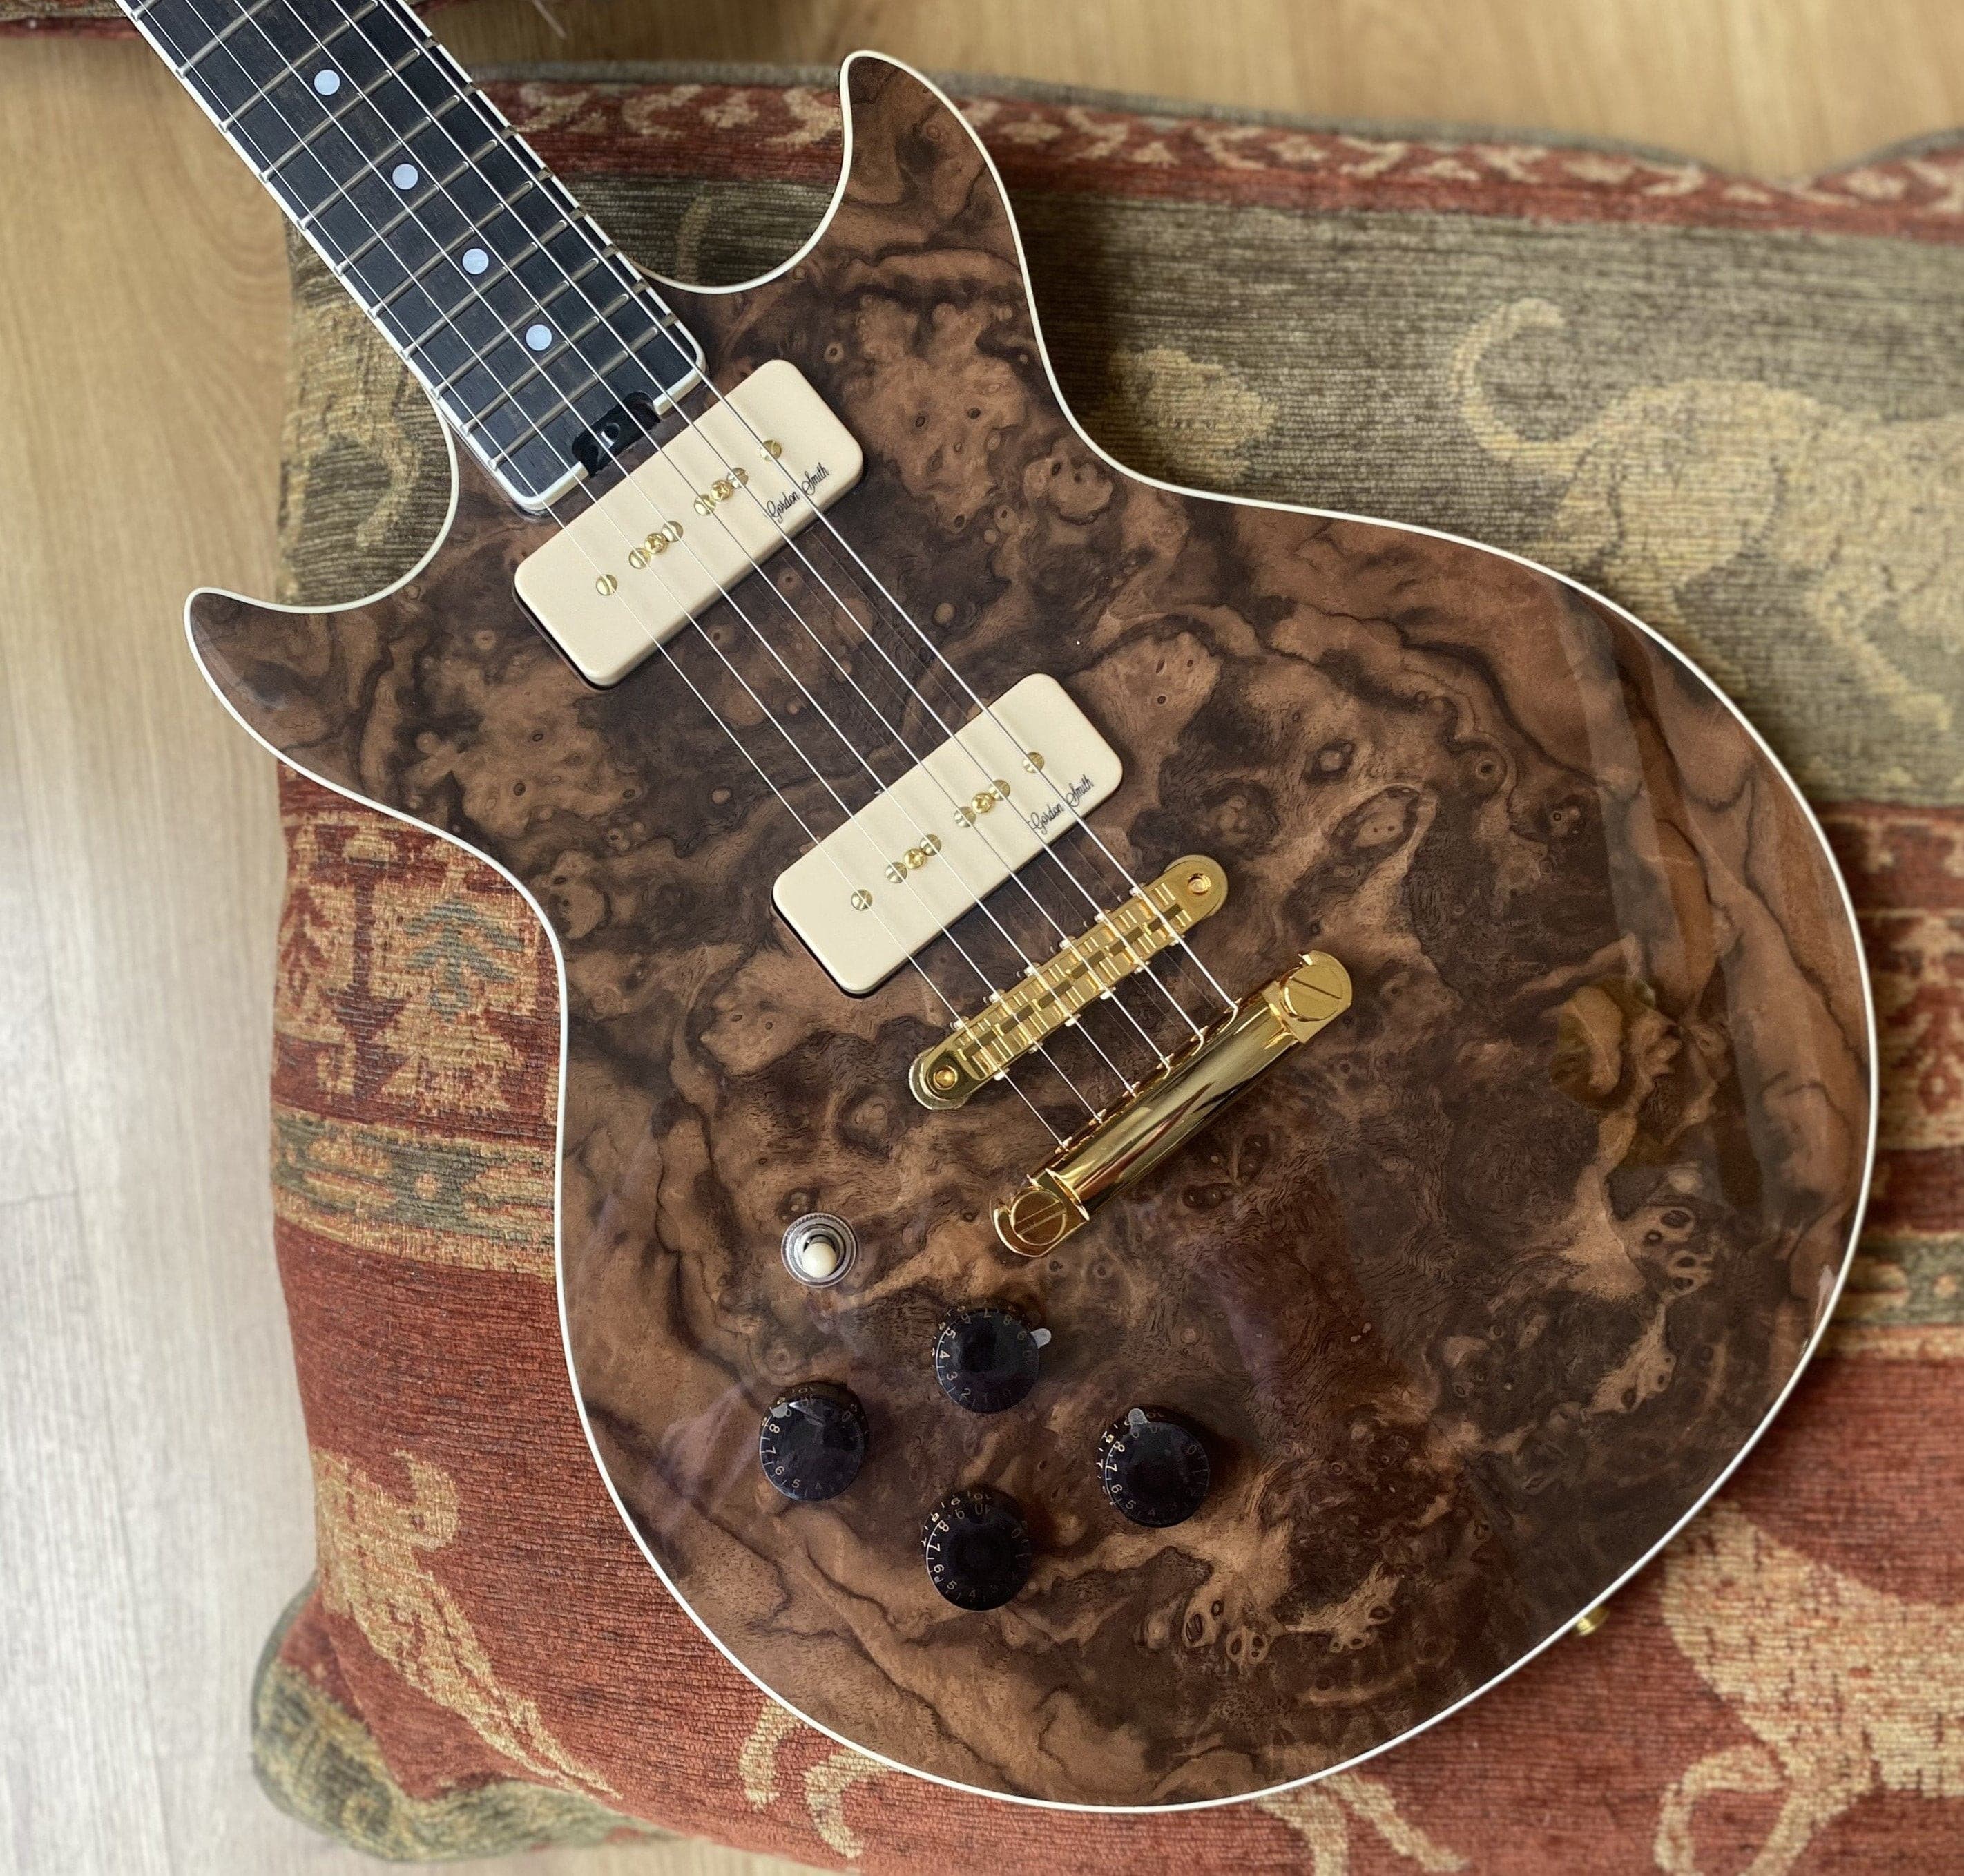 Gordon Smith GS Deluxe Burled Walnut P90 Custom Left Handed #20345, Electric Guitar for sale at Richards Guitars.